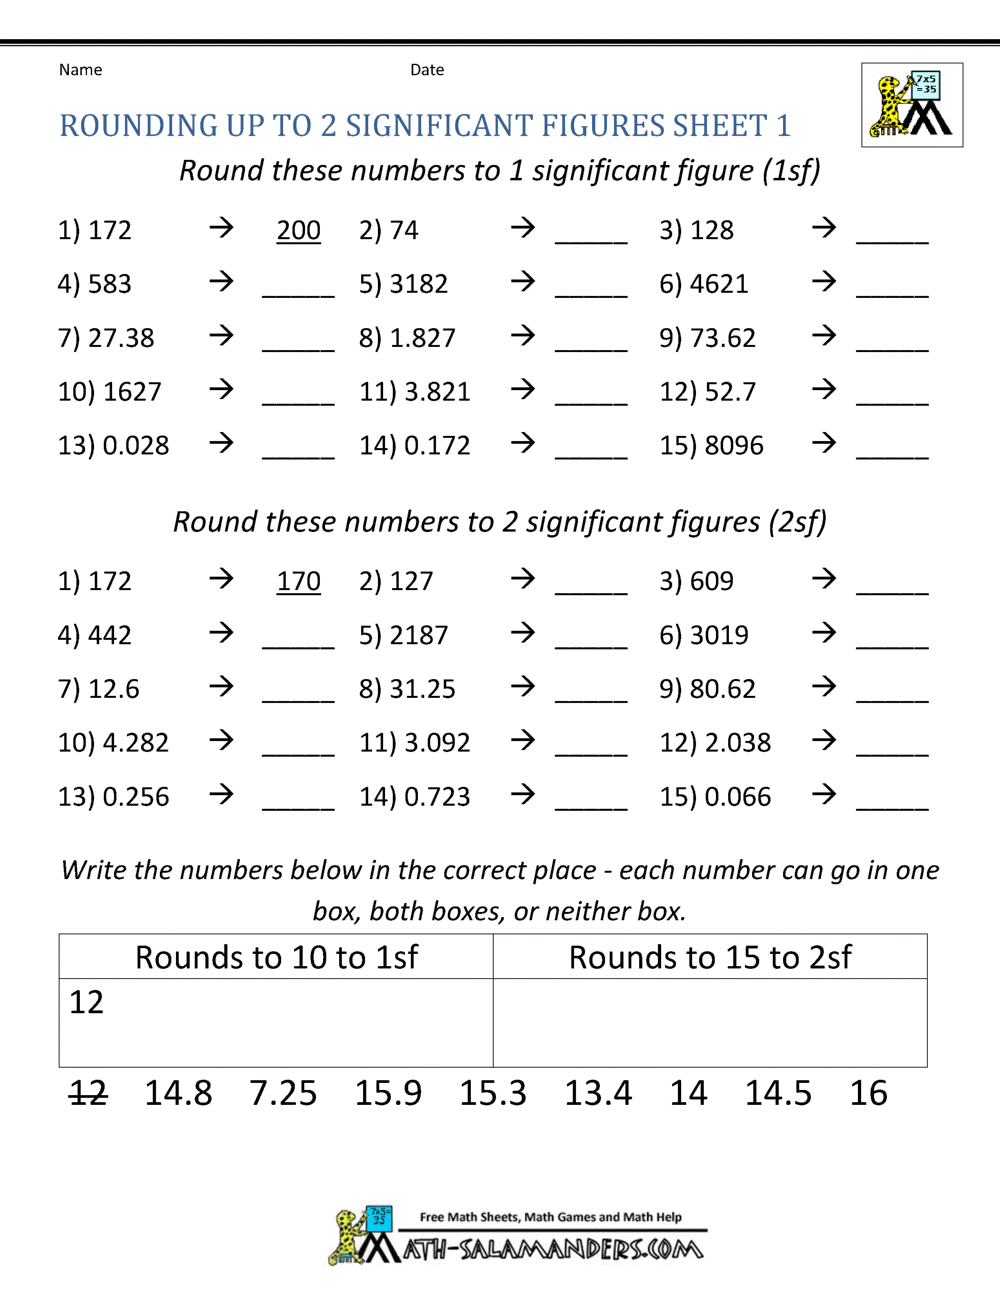 Rounding Significant Figures Pertaining To Significant Figures Practice Worksheet